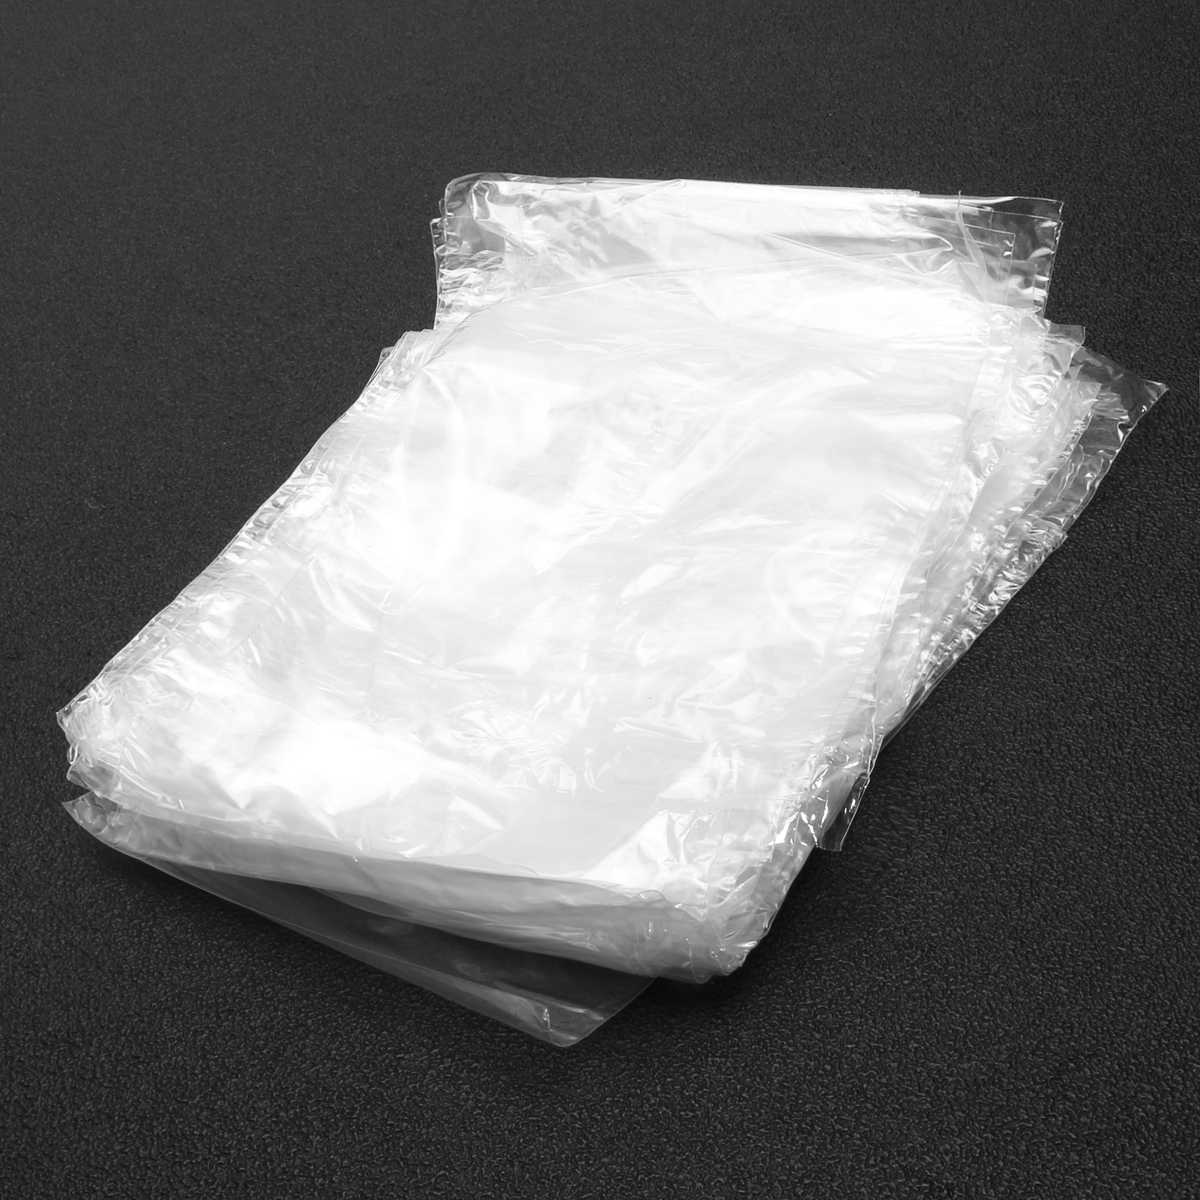 100Pcs 4x 6 Transparent Clear Shrink Wrap Films Heat Seal Packaging Storage Antidust Bags Gift Packaging DIY Crafts